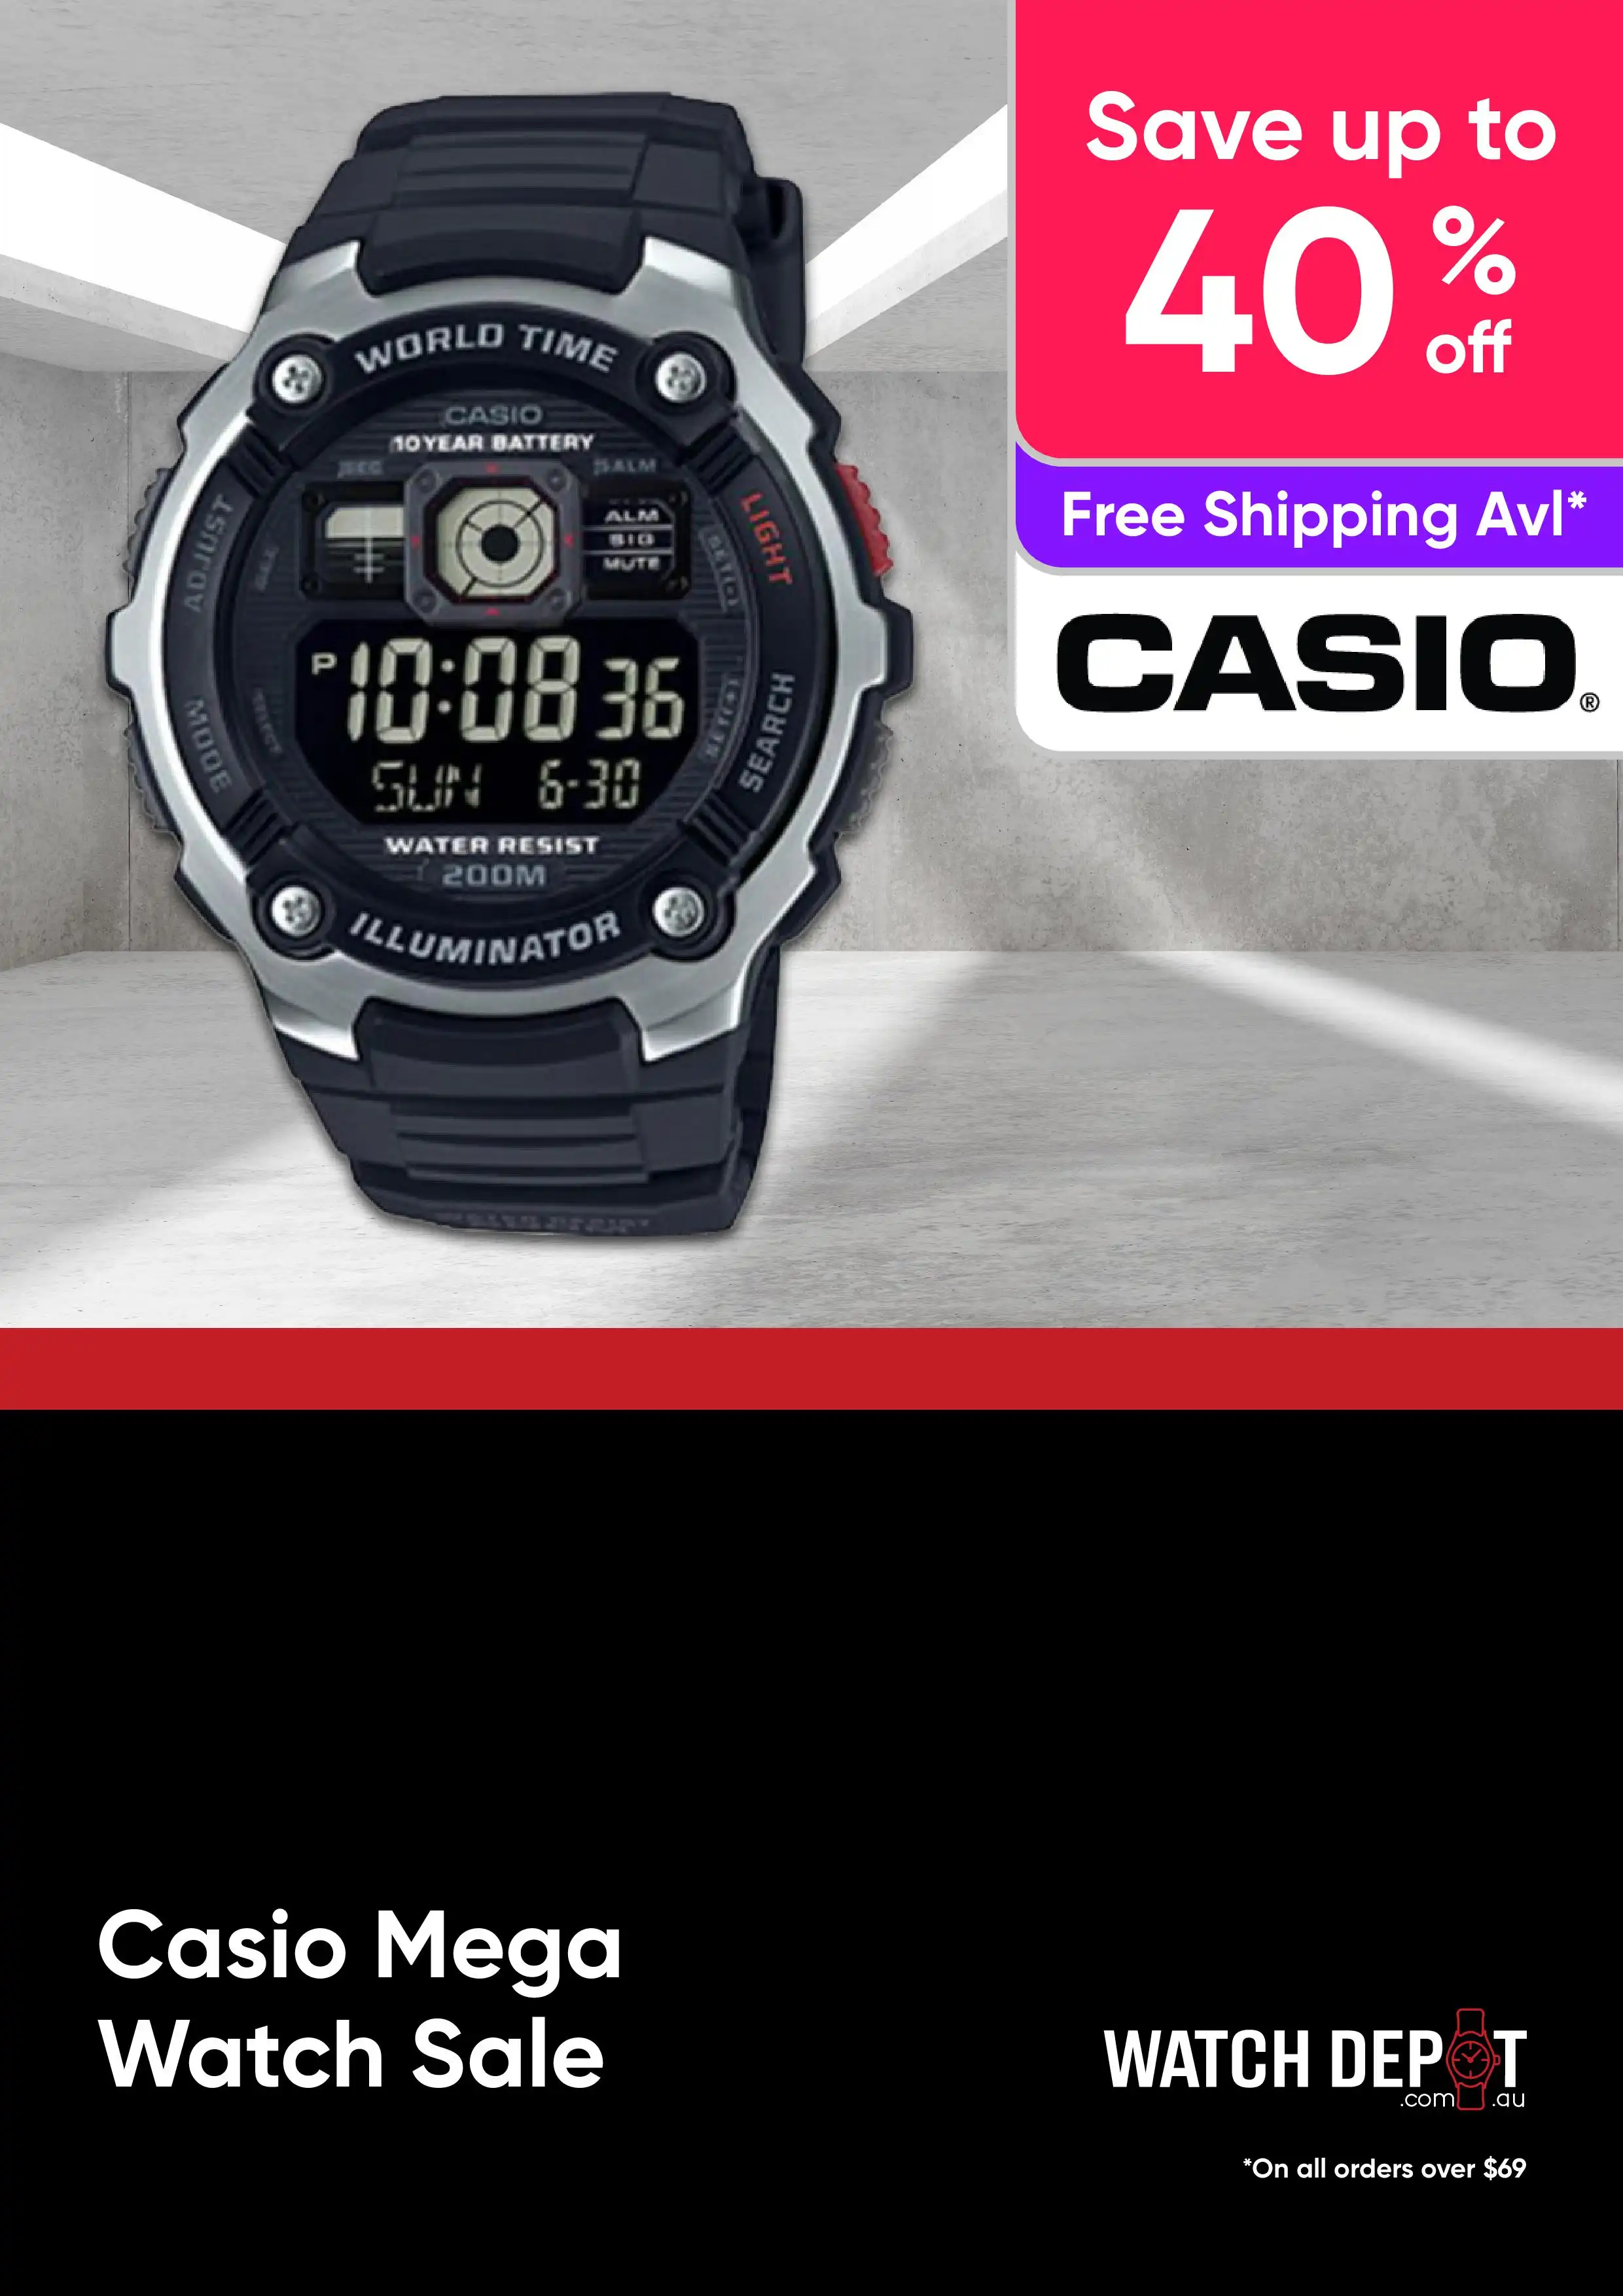 Casio Watch Mega Sale - Up to 40% off